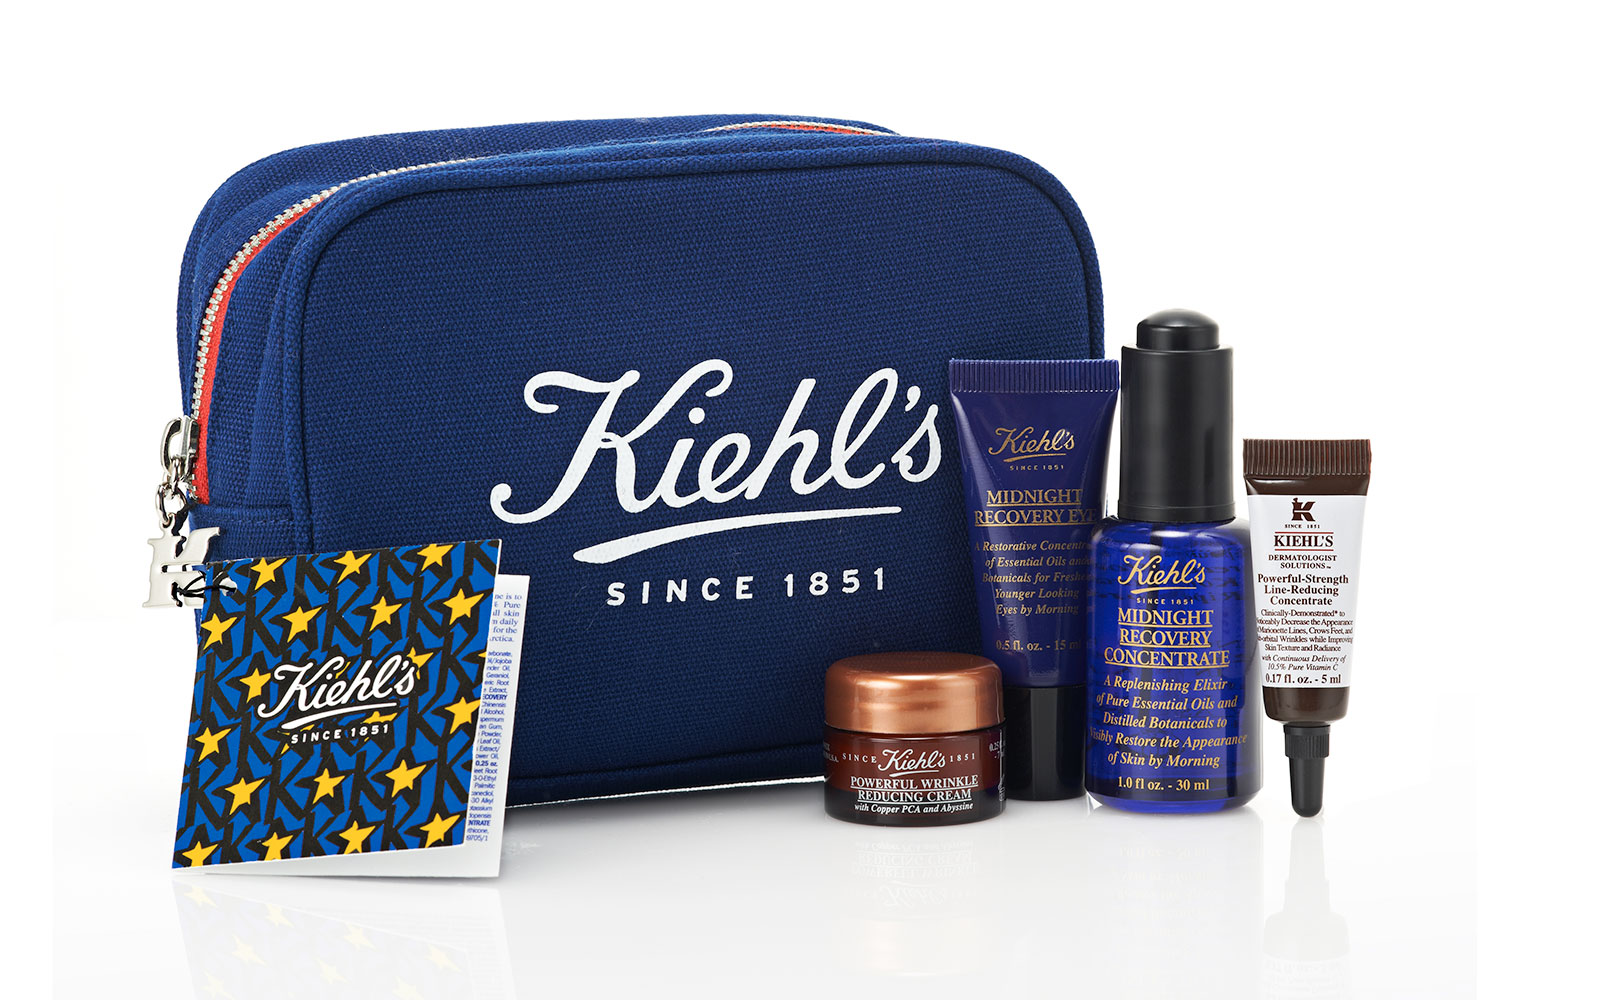 holiday-beauty-gift-guide-kiehls-Healthy-Skin-Essentials-Every-Night.jpg